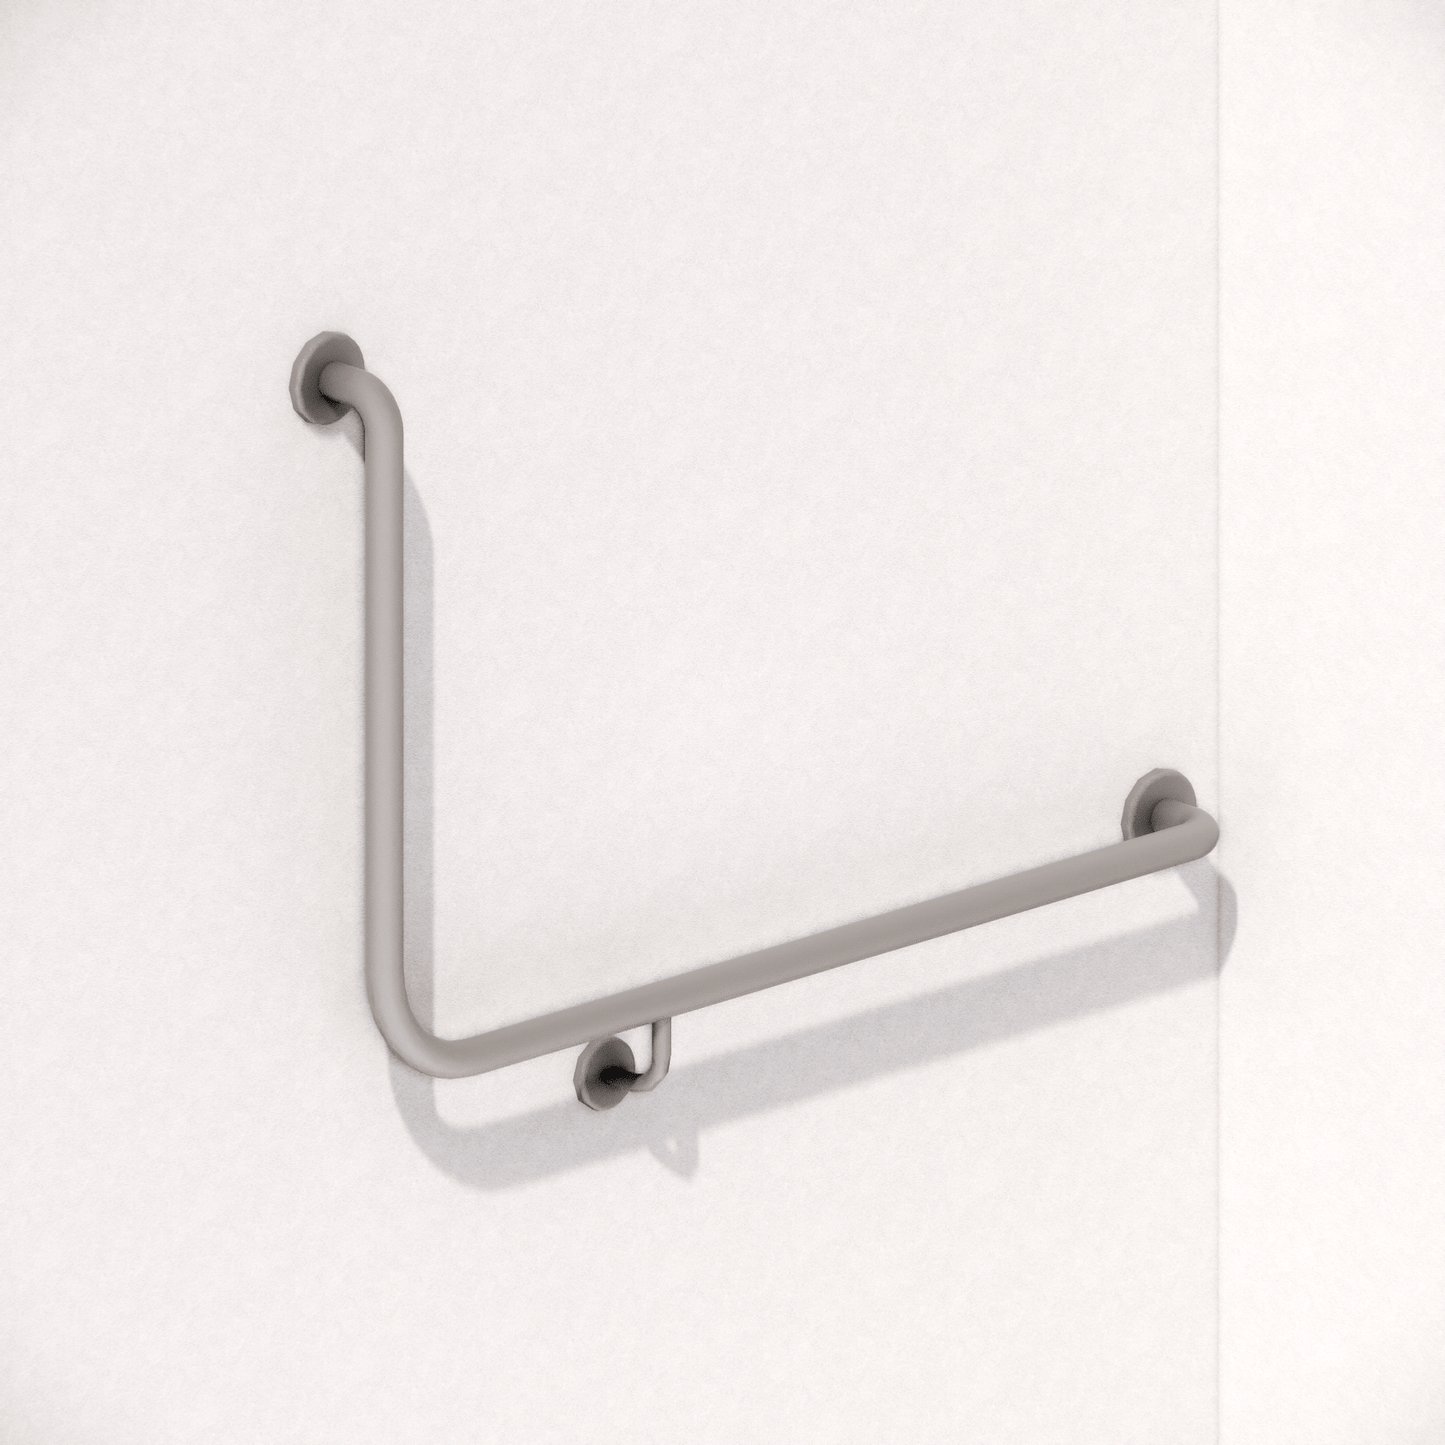 BIMcraftHQ-Specialty Fixtures-Angled Grab Rail